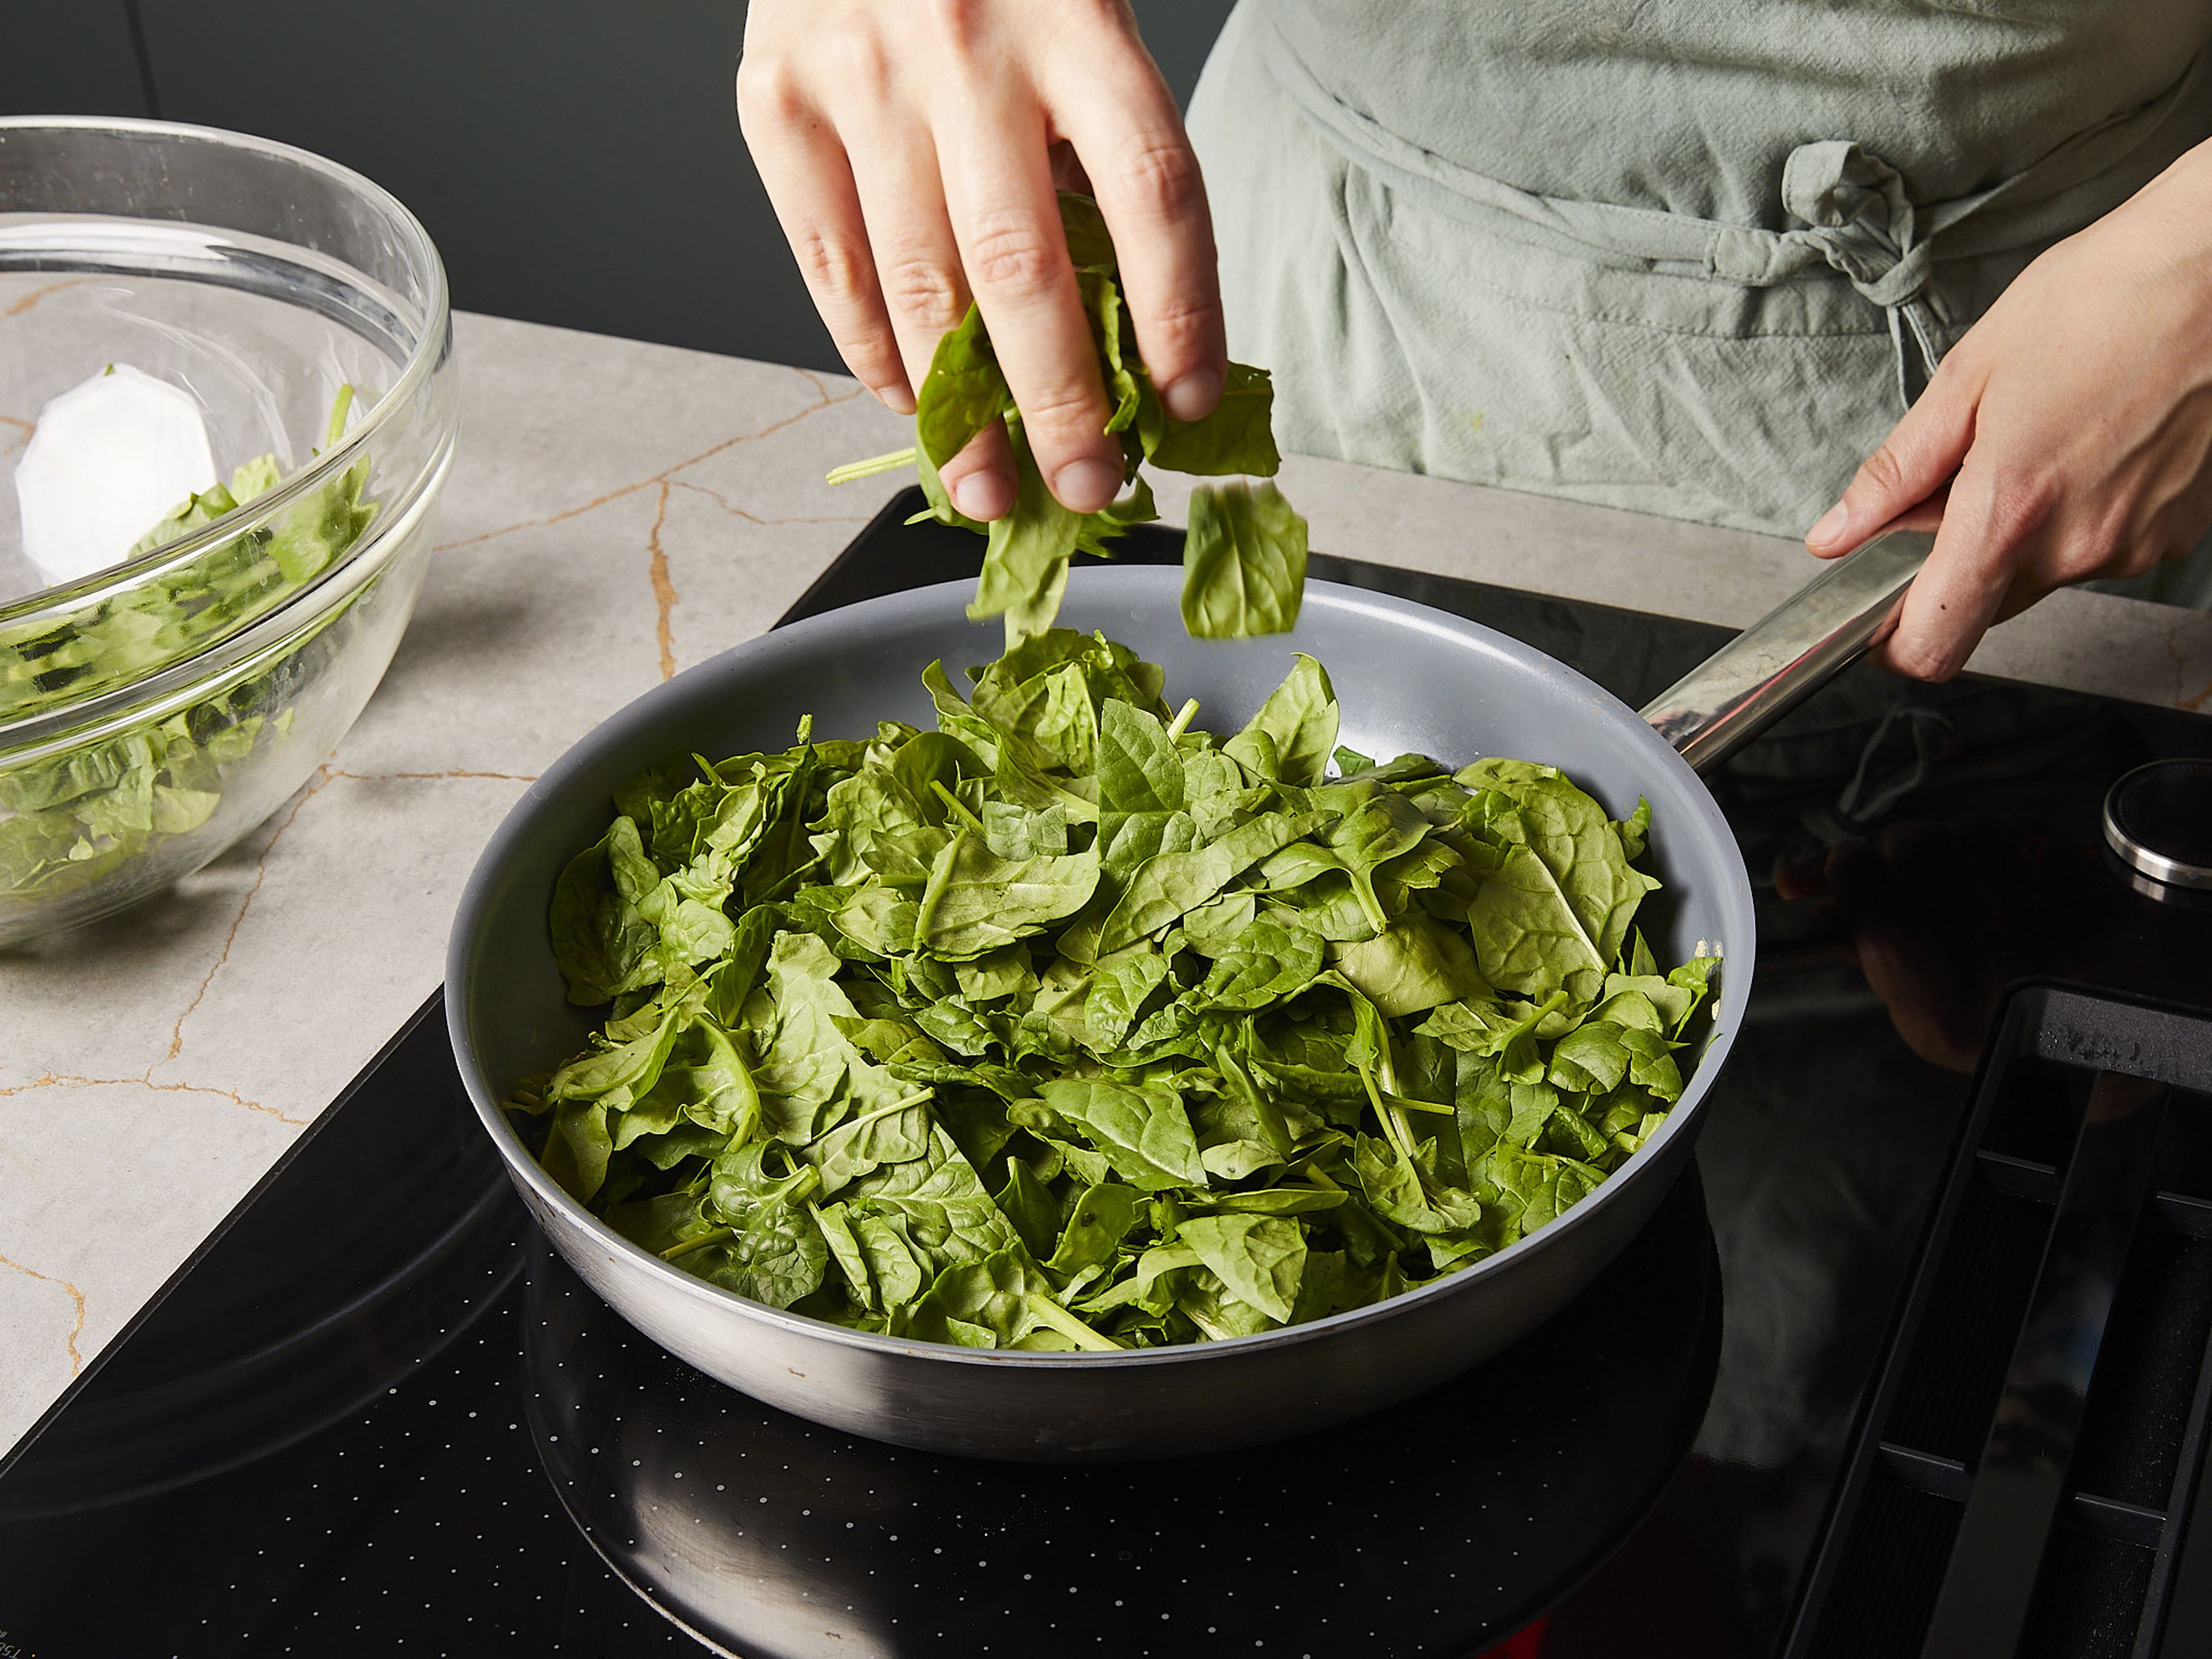 Coarsely chop spinach. Grate garlic. Heat olive oil in a pan and fry garlic for a few seconds. Add spinach and water, cover with lid and fry over medium-high heat for approx. 3–5 min. until spinach starts to wilt.